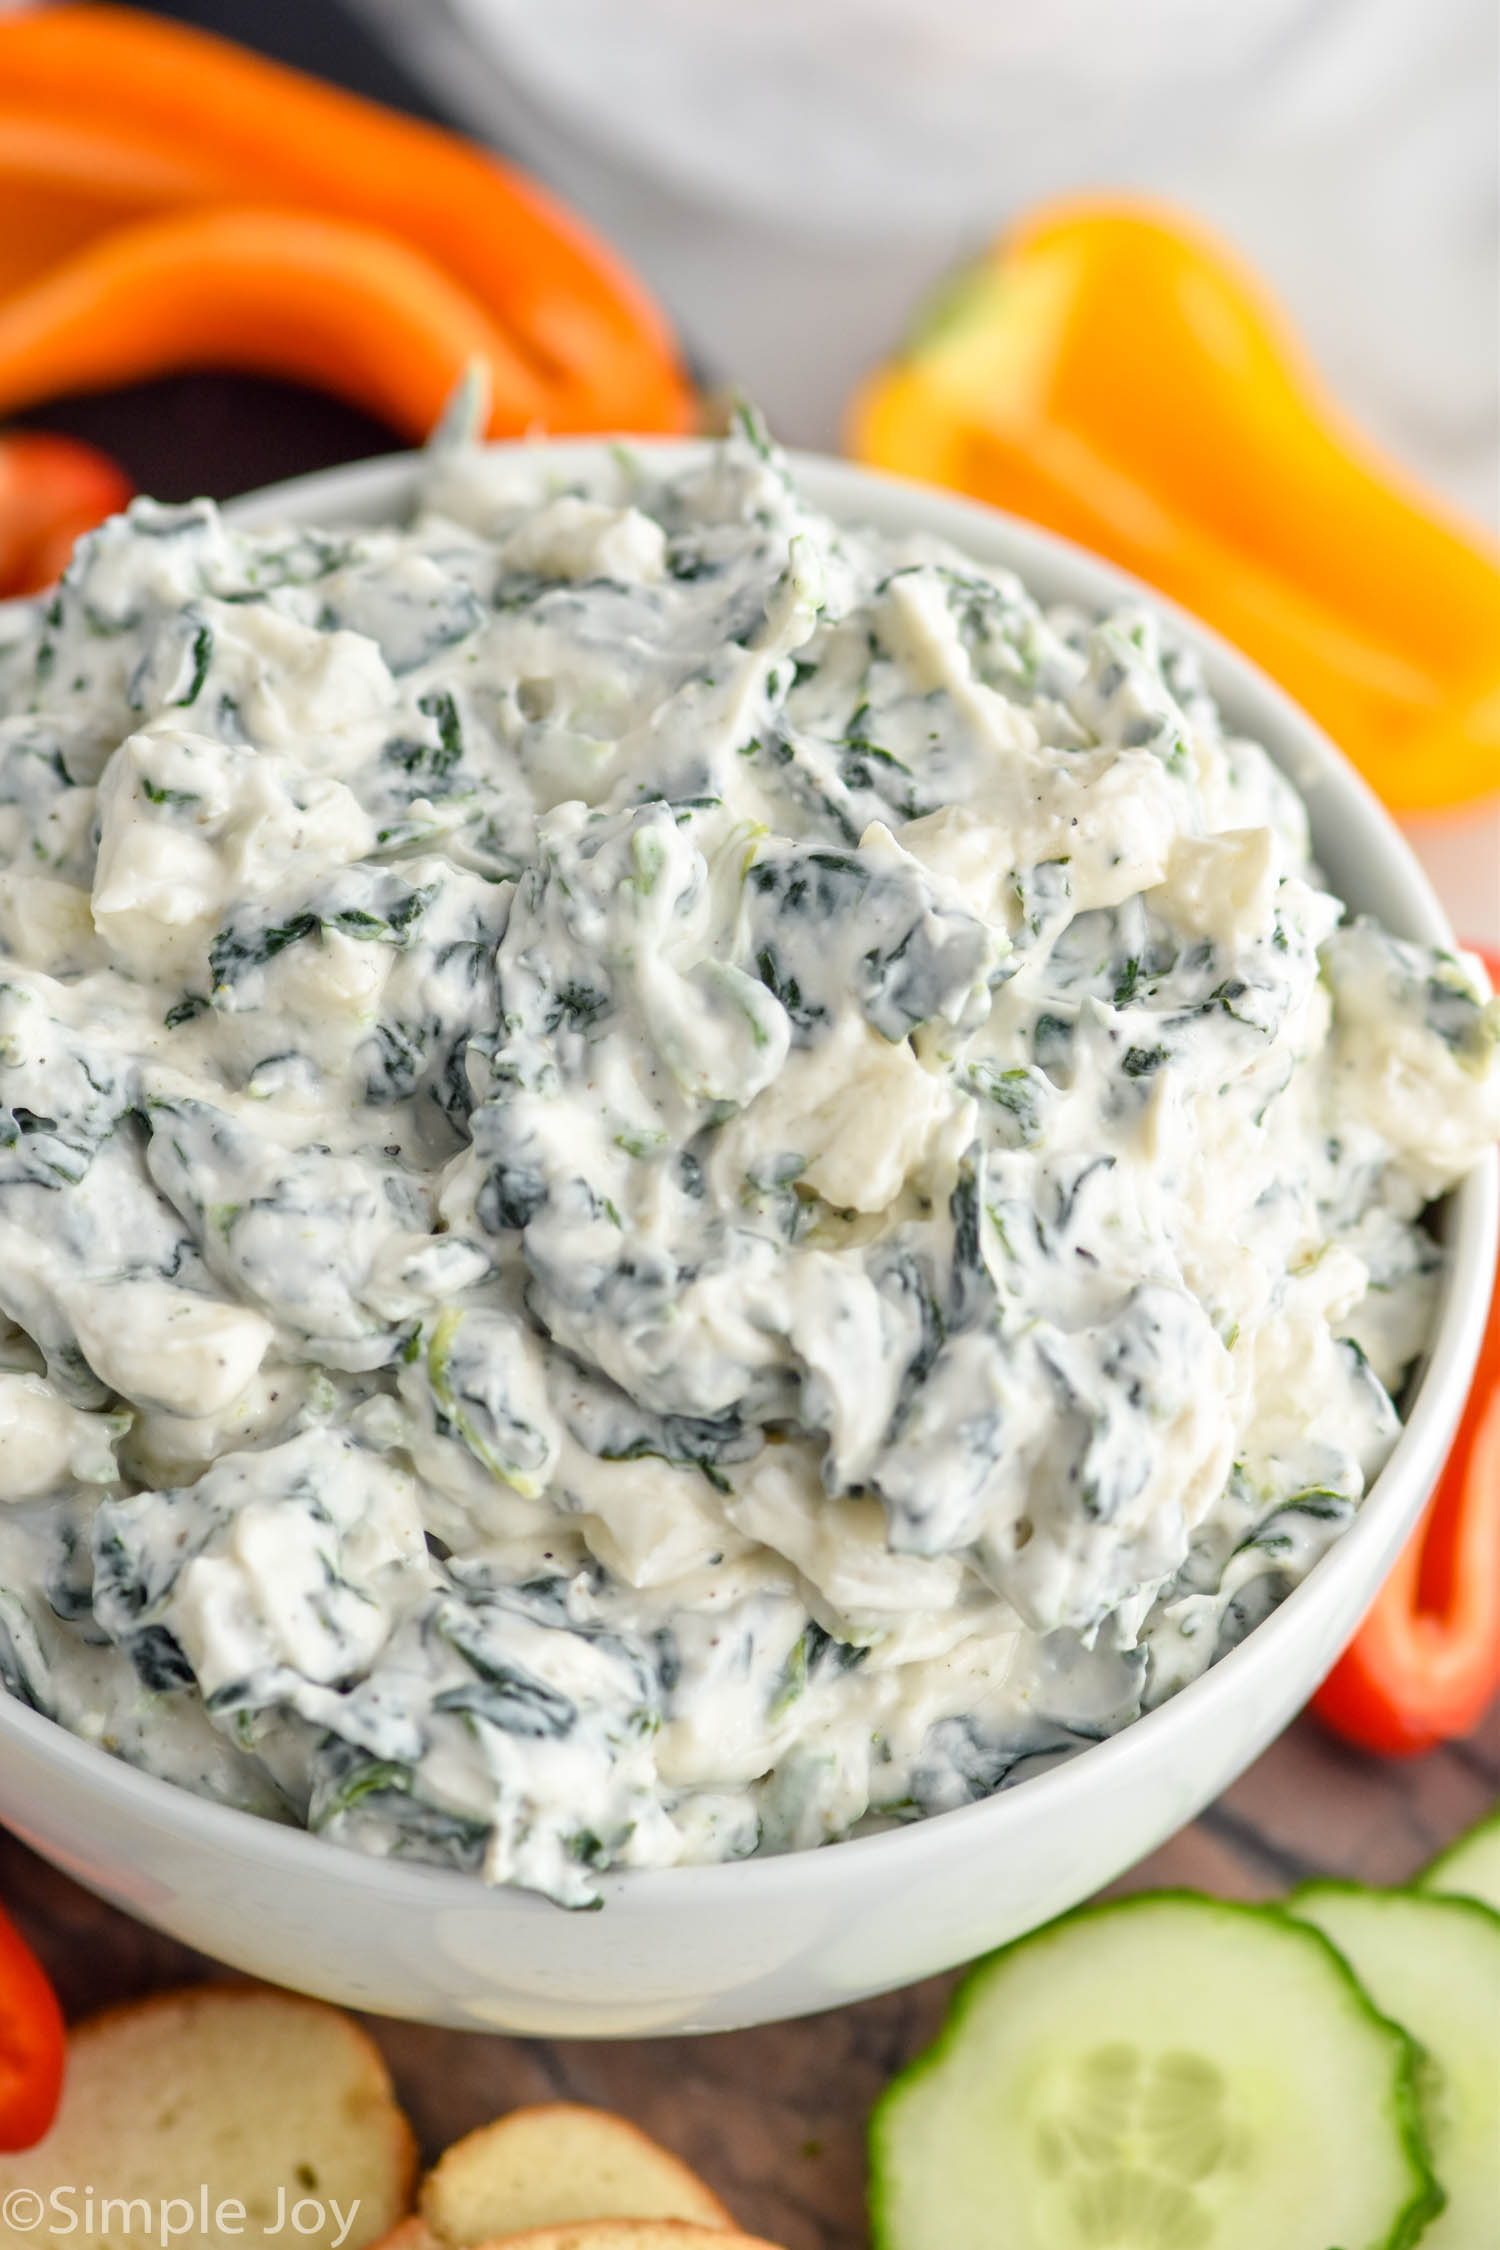 15 Easy Cold Dips for Parties